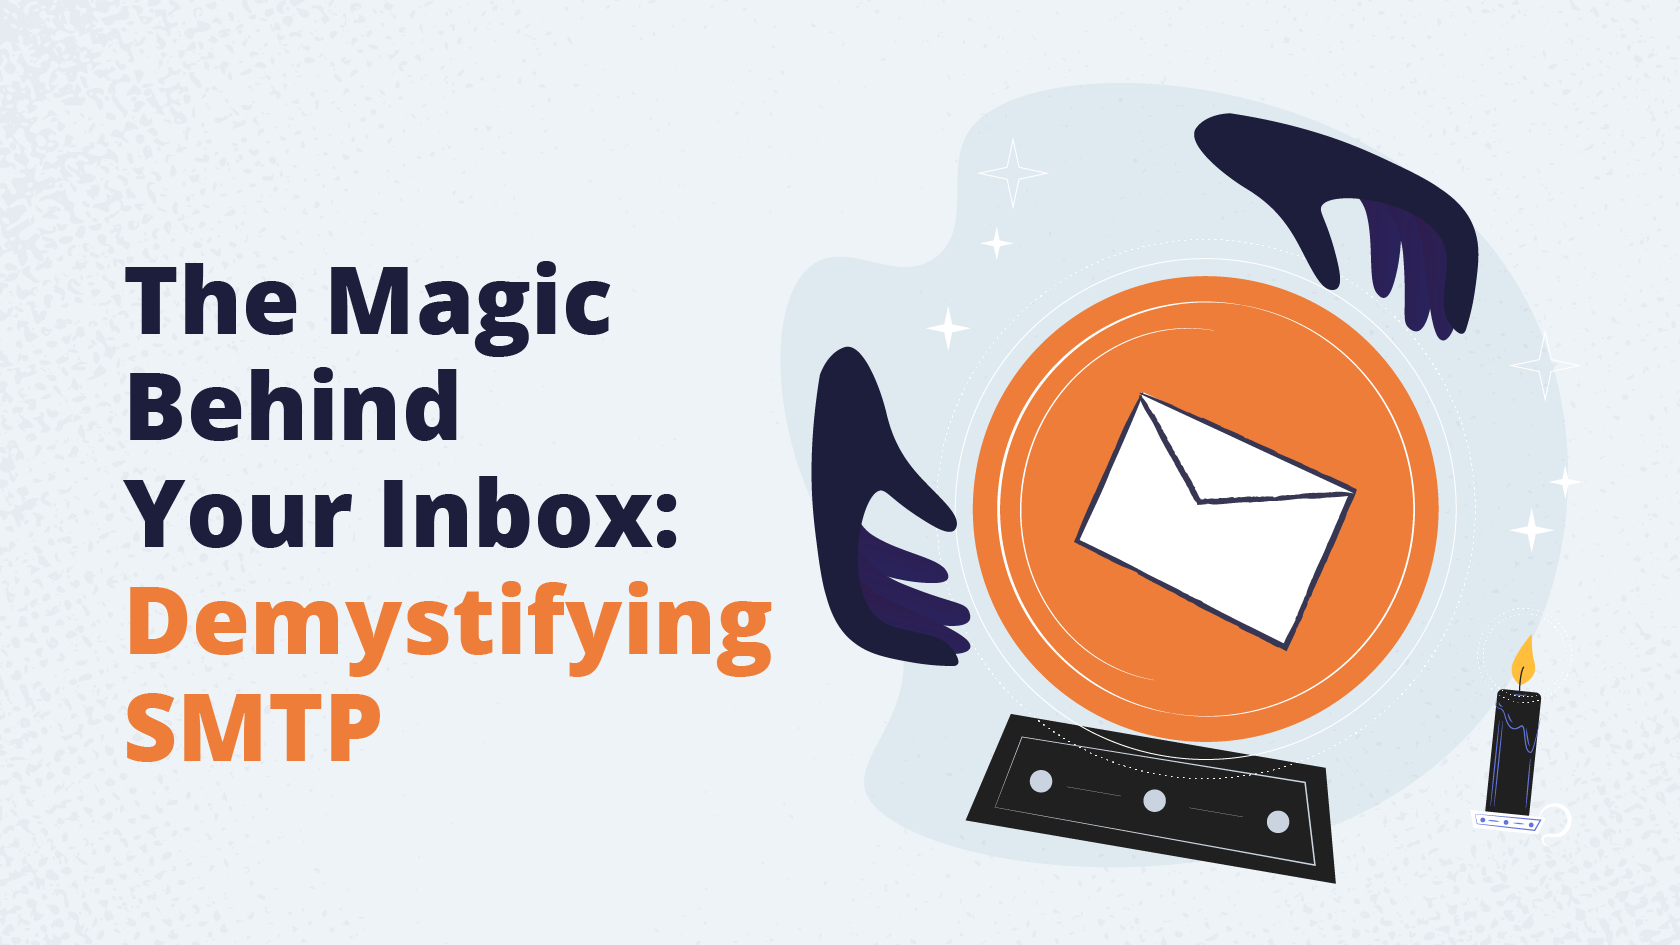 The Magic Behind Your Inbox: Demystifying SMTP